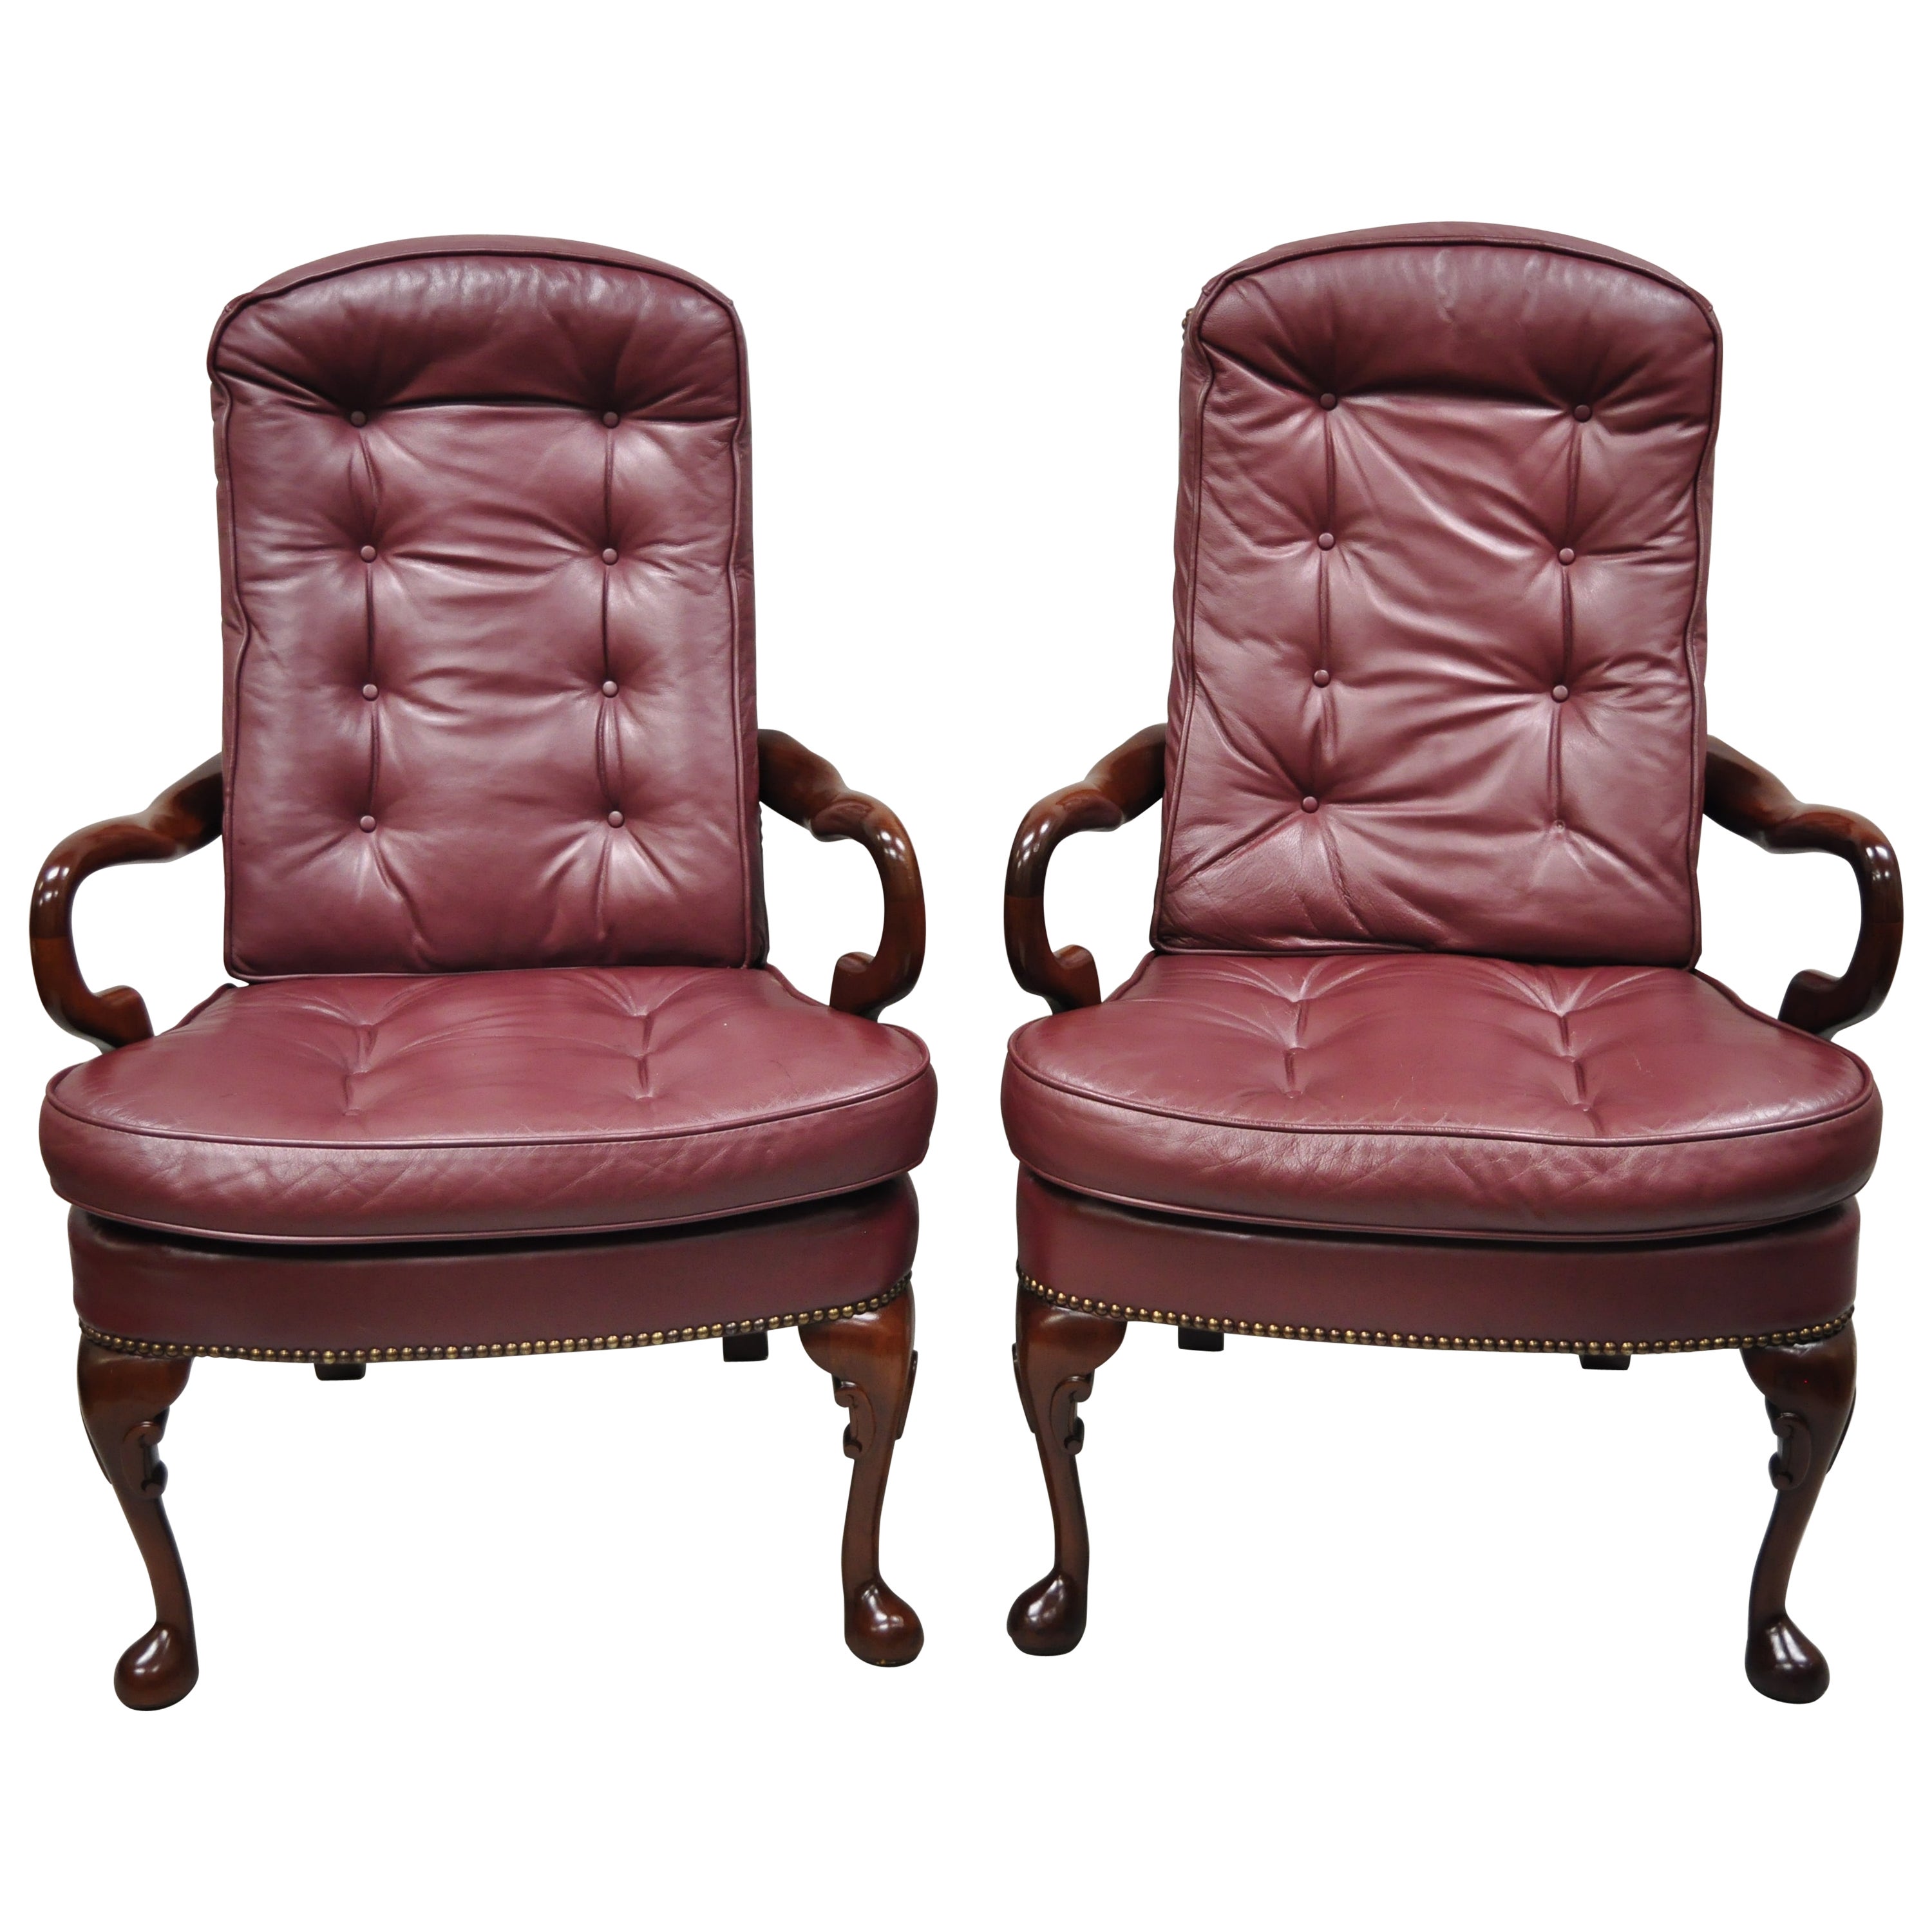 St Timothy Chair Co Burgundy Leather Queen Anne Library Office Arm Chairs, Pair For Sale